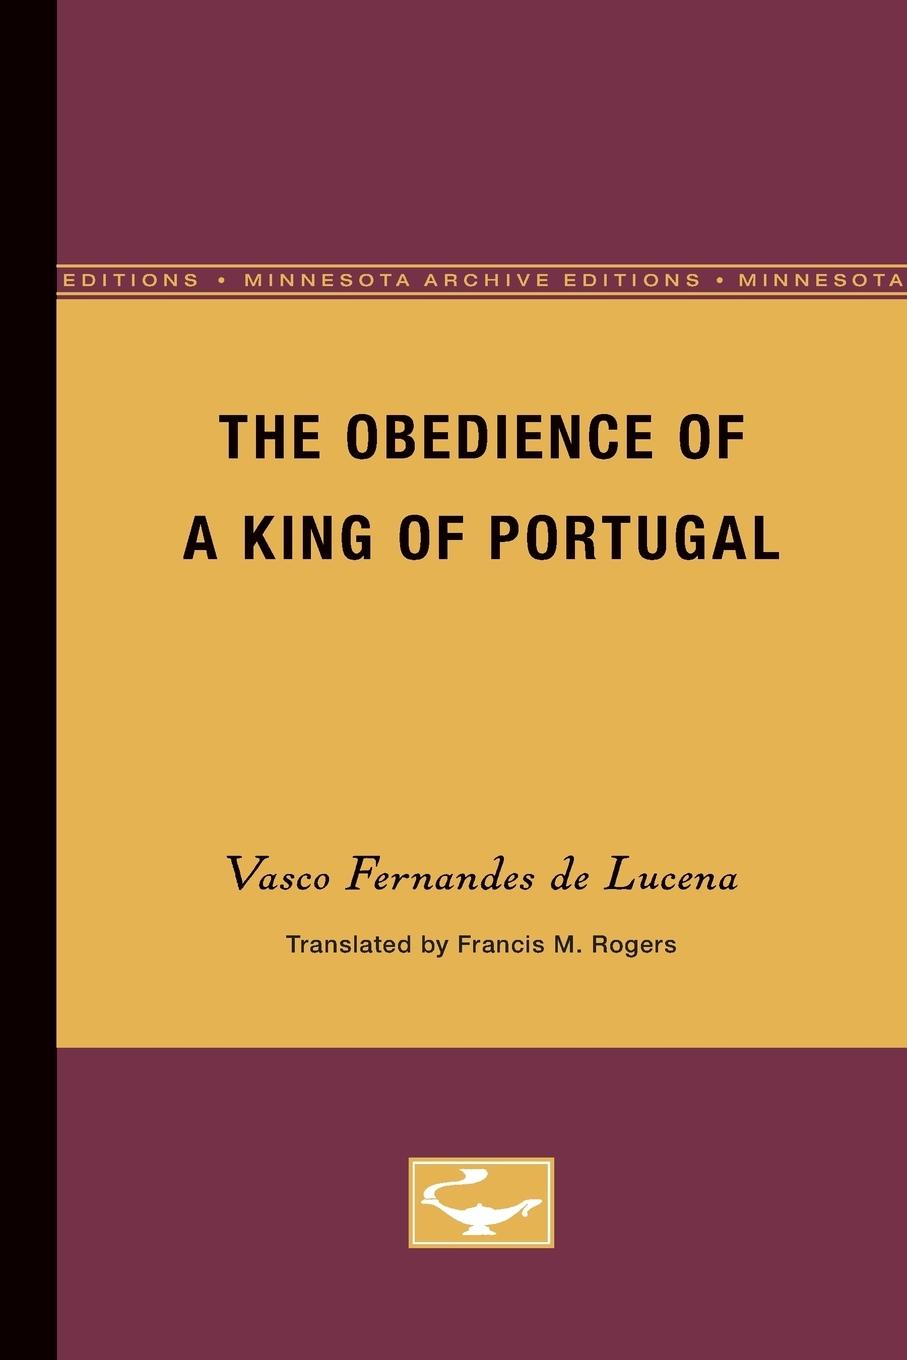 The Obedience of a King of Portugal - De Lucena, Vasco Fernandes